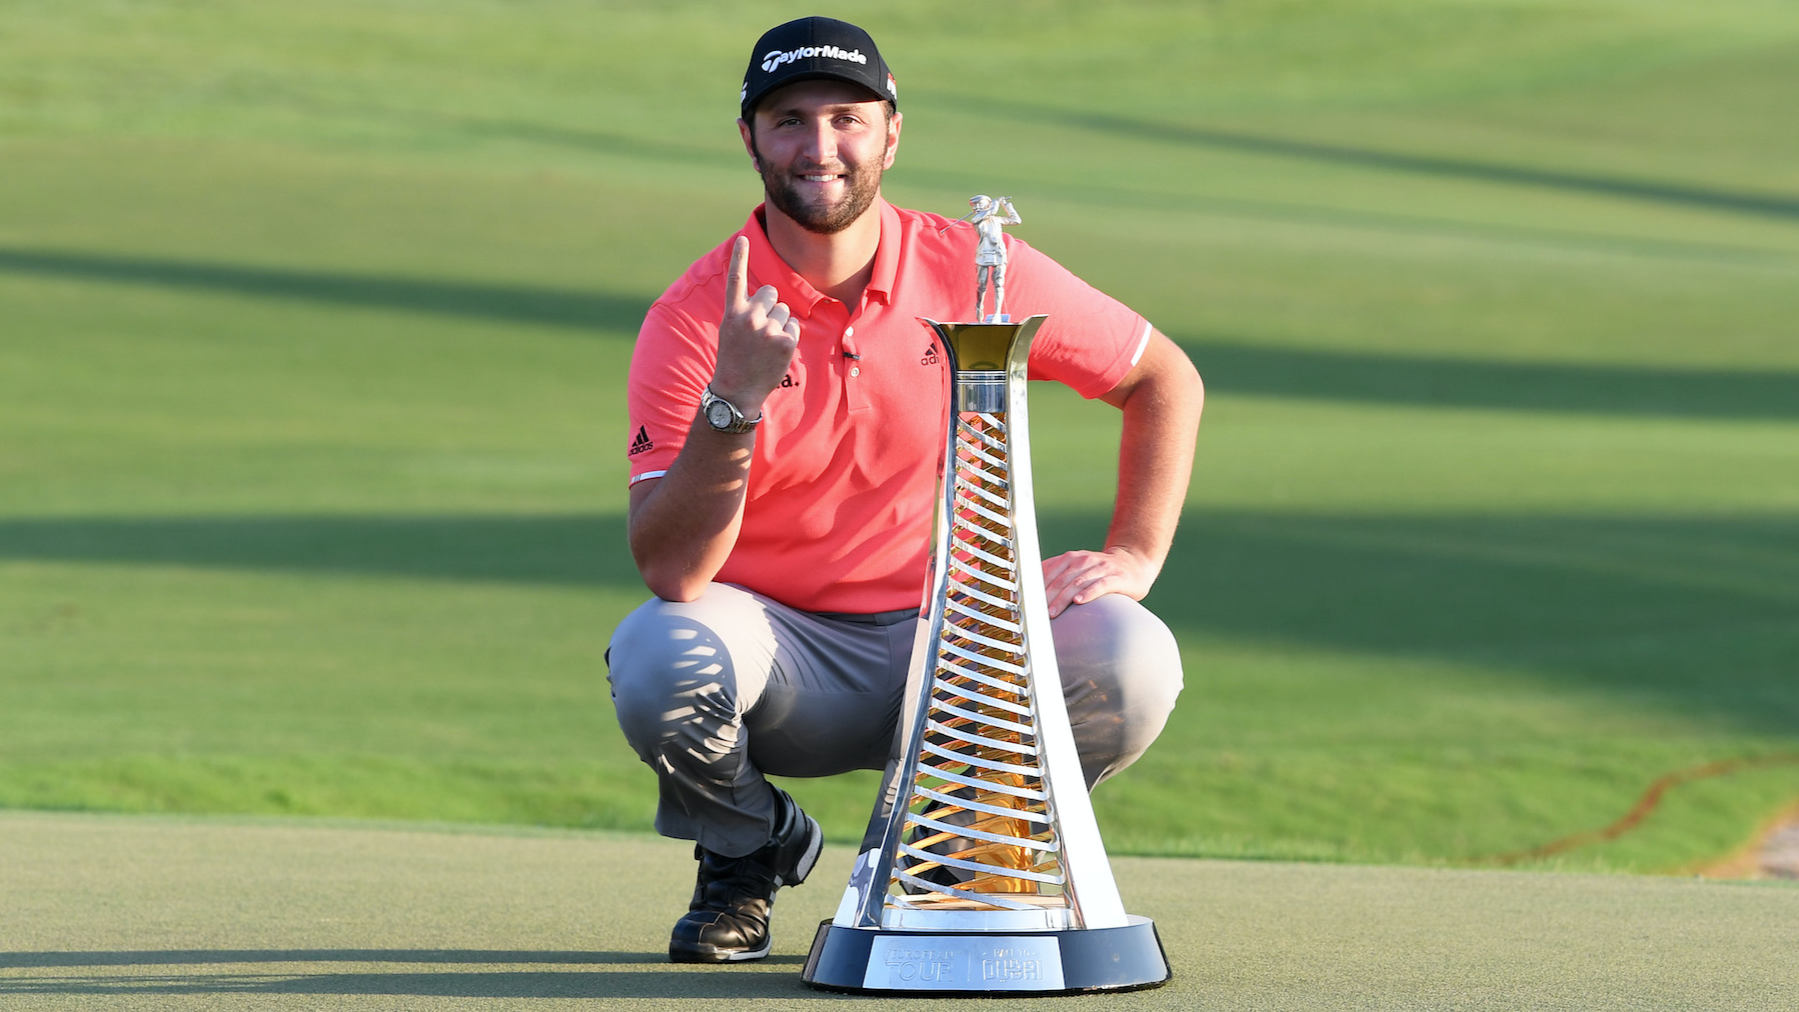 DUBAI, UNITED ARAB EMIRATES - NOVEMBER 24: Jon Rahm of Spain poses with the Race to Dubai trophy following his victory during Day Four of the DP World Tour Championship Dubai at Jumerirah Golf Estates on November 24, 2019 in Dubai, United Arab Emirates. (Photo by Ross Kinnaird/Getty Images)